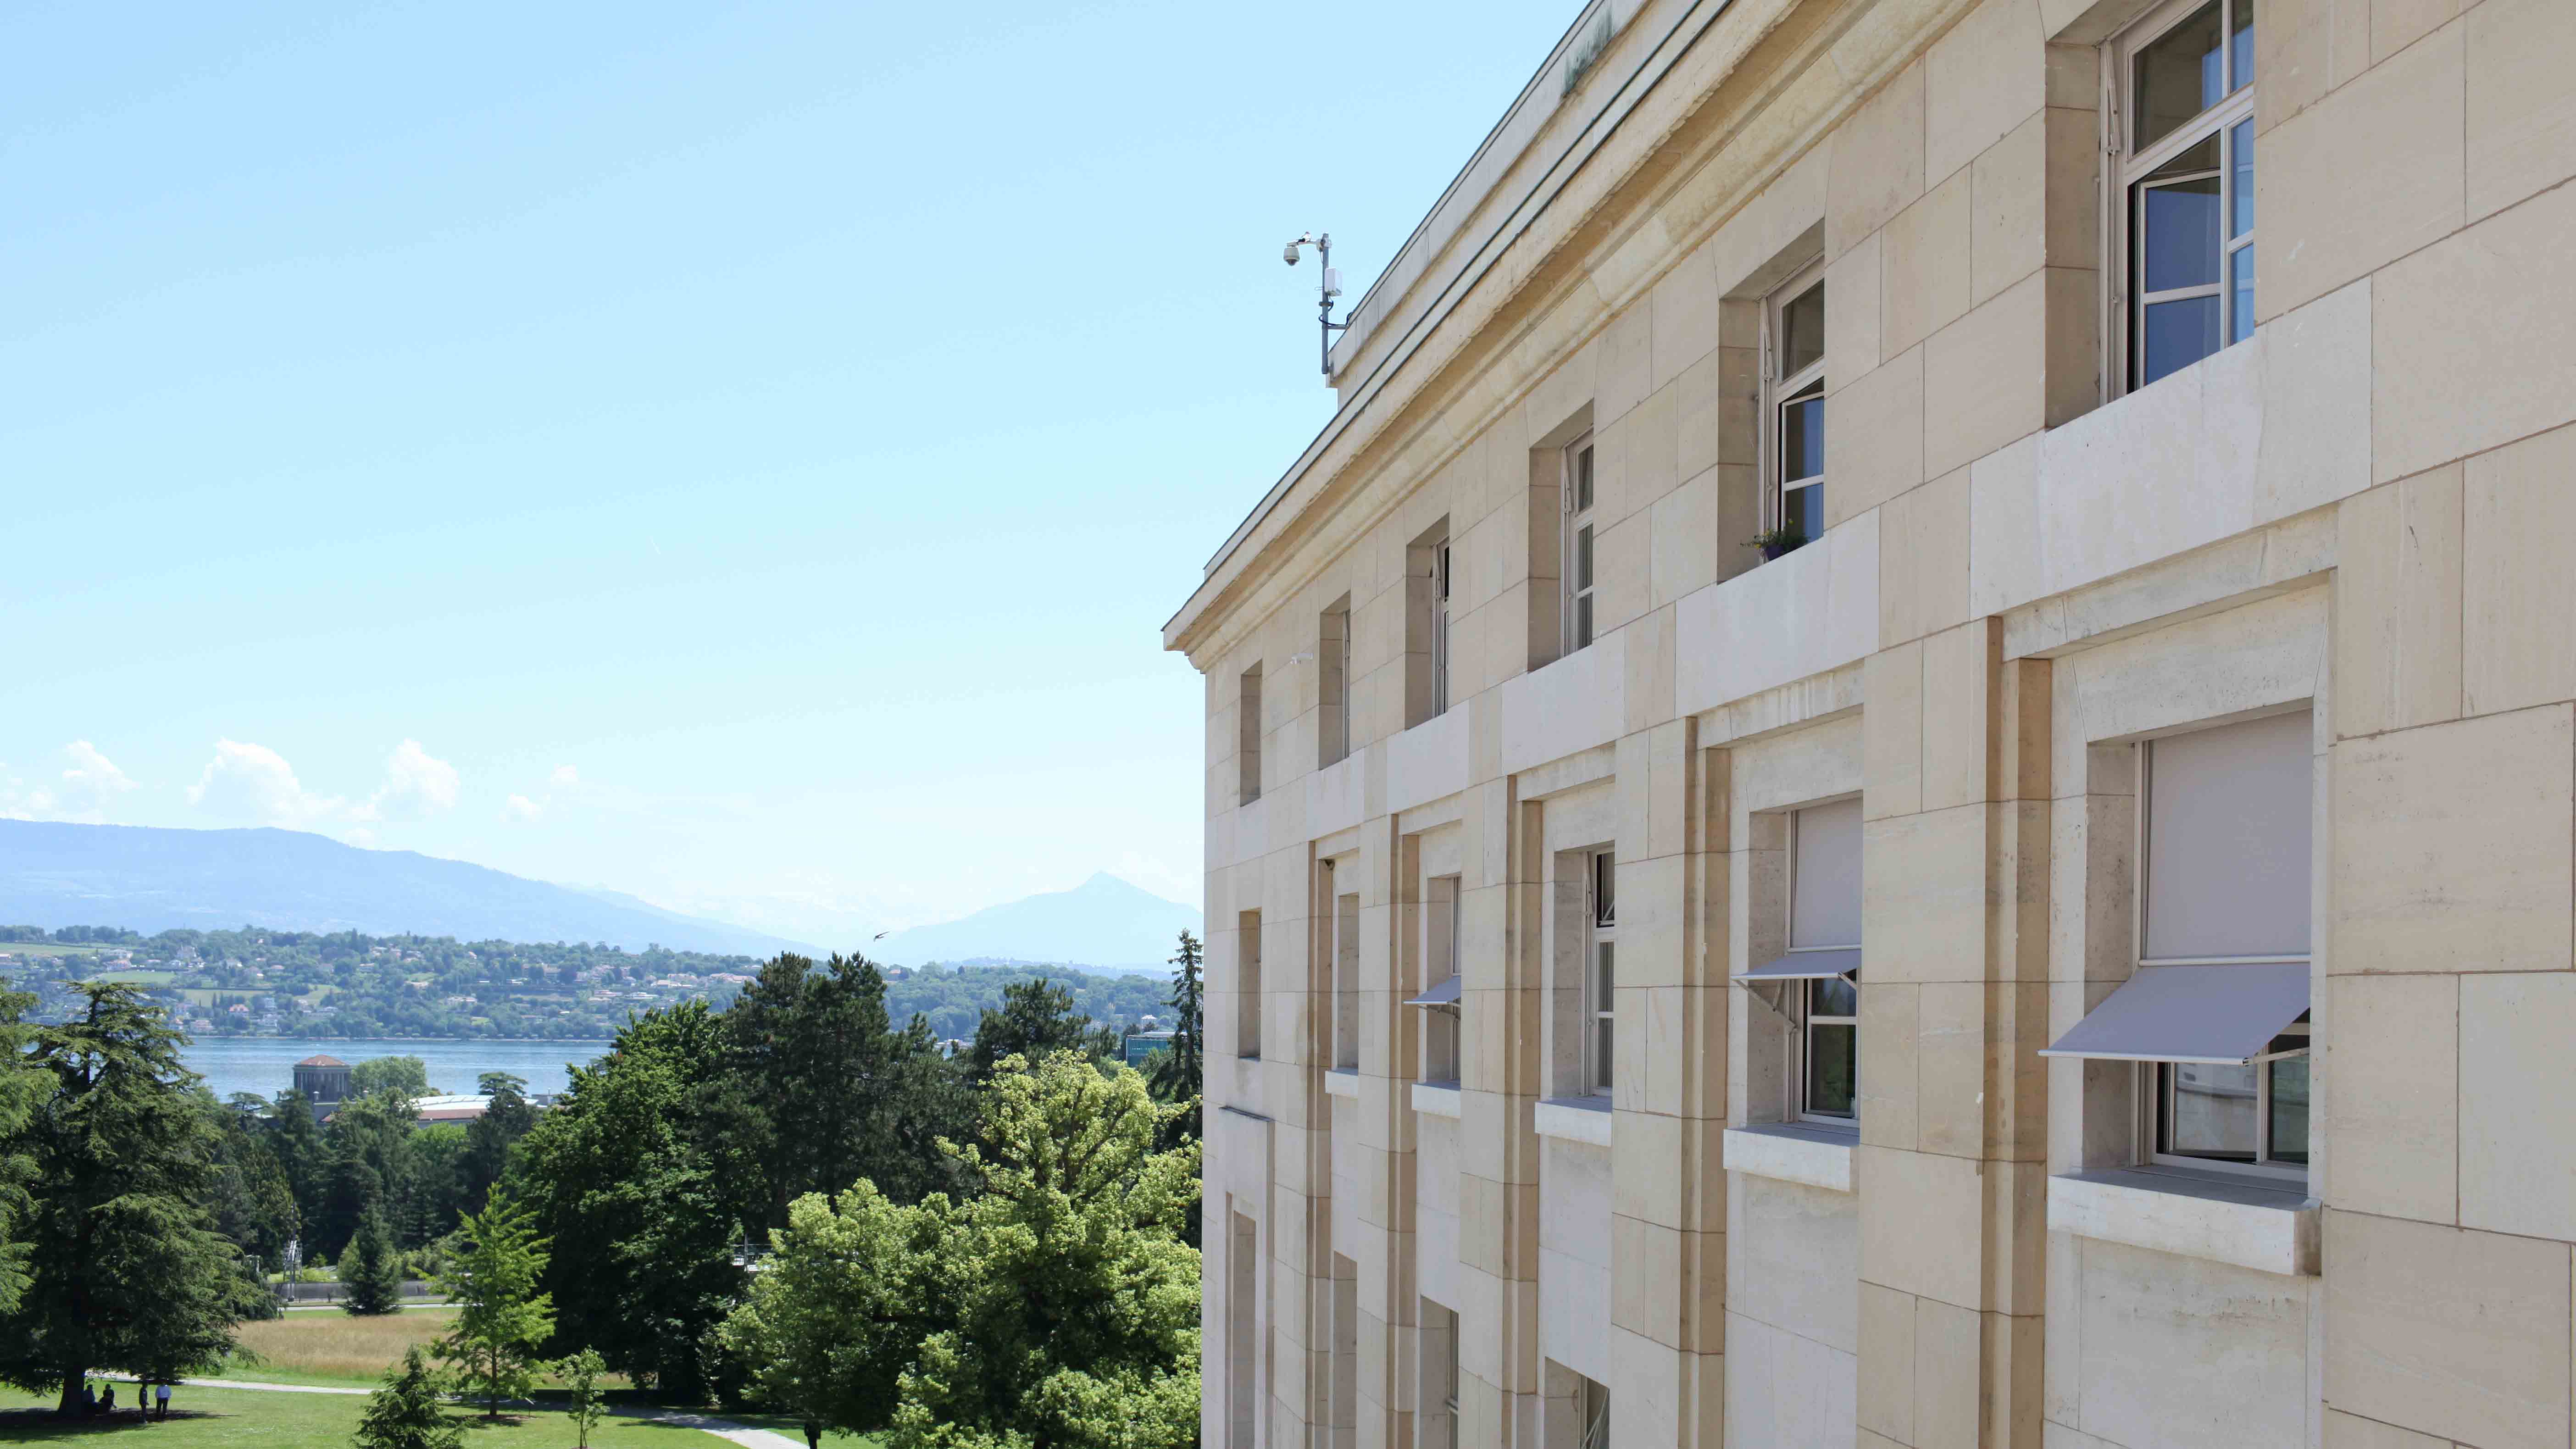 Palais des nations main with steel glass windows